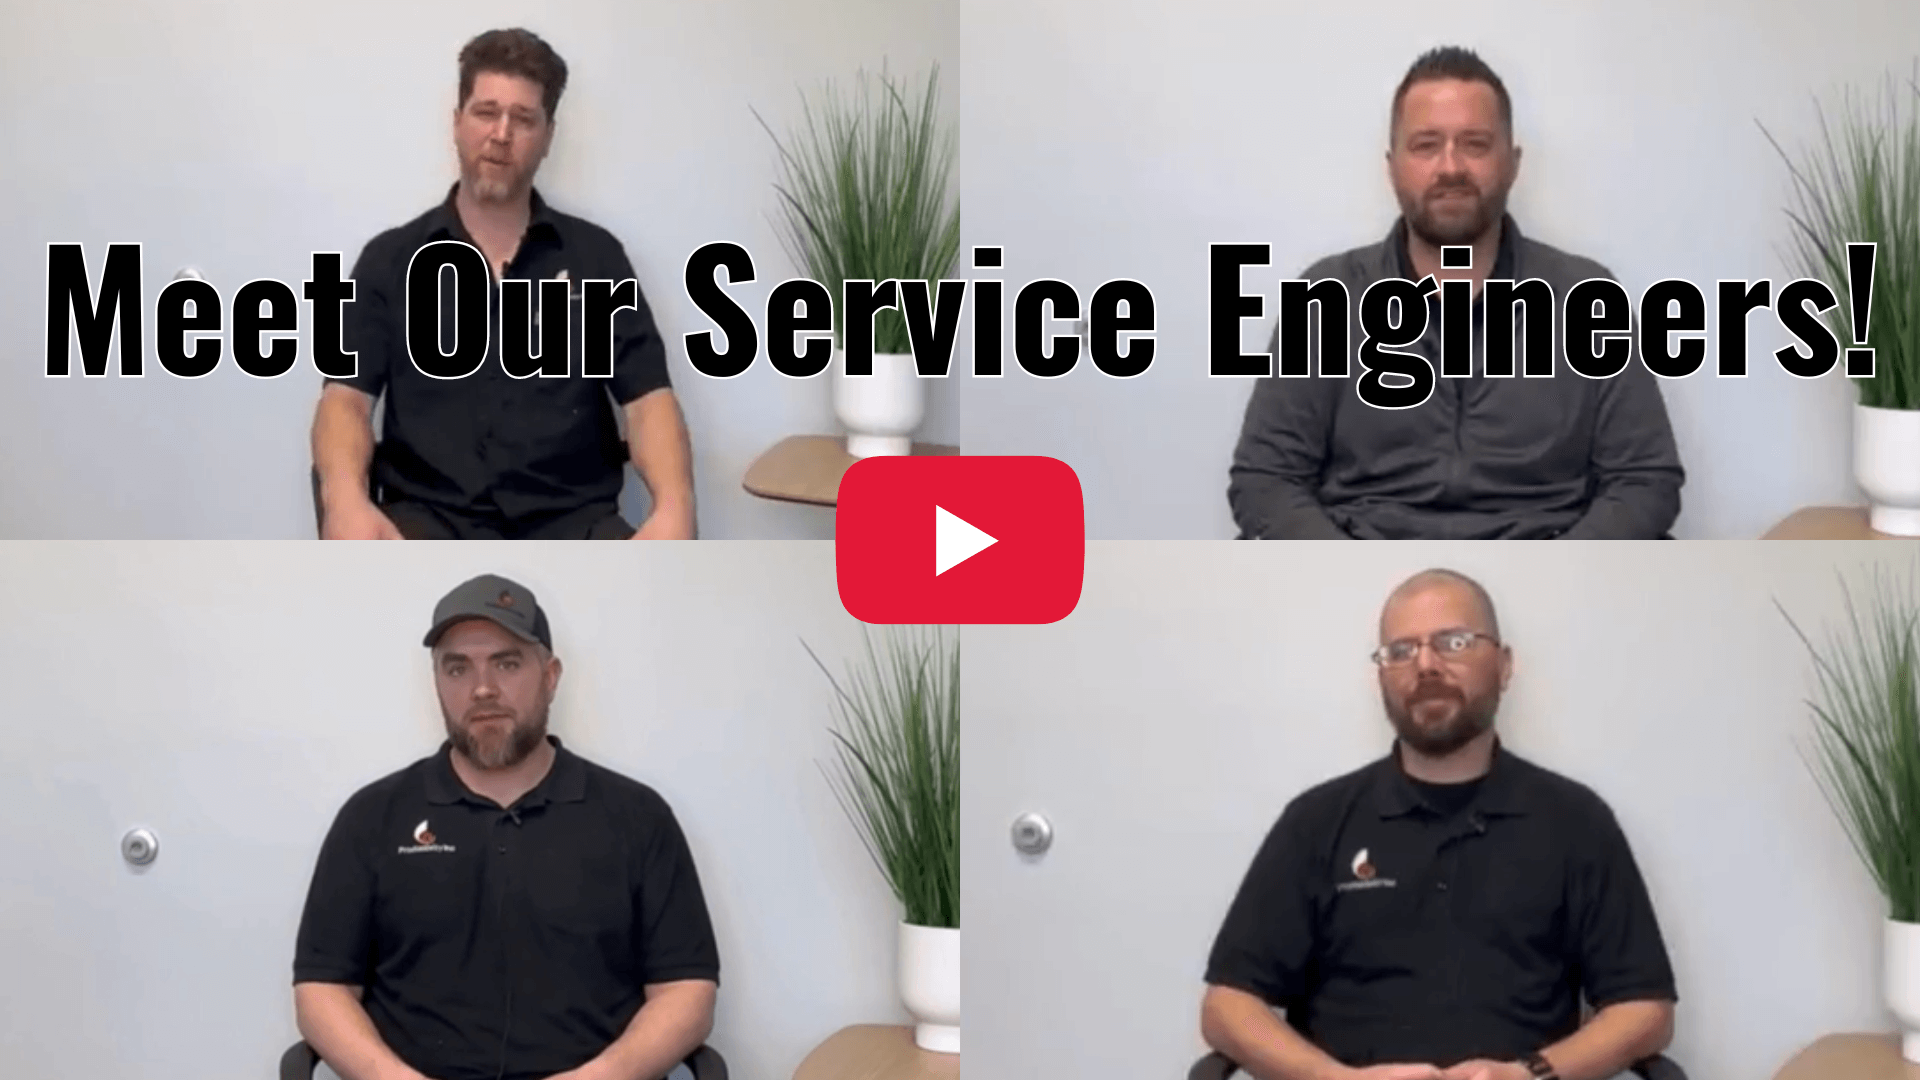 Meet Our Service Engineers Video